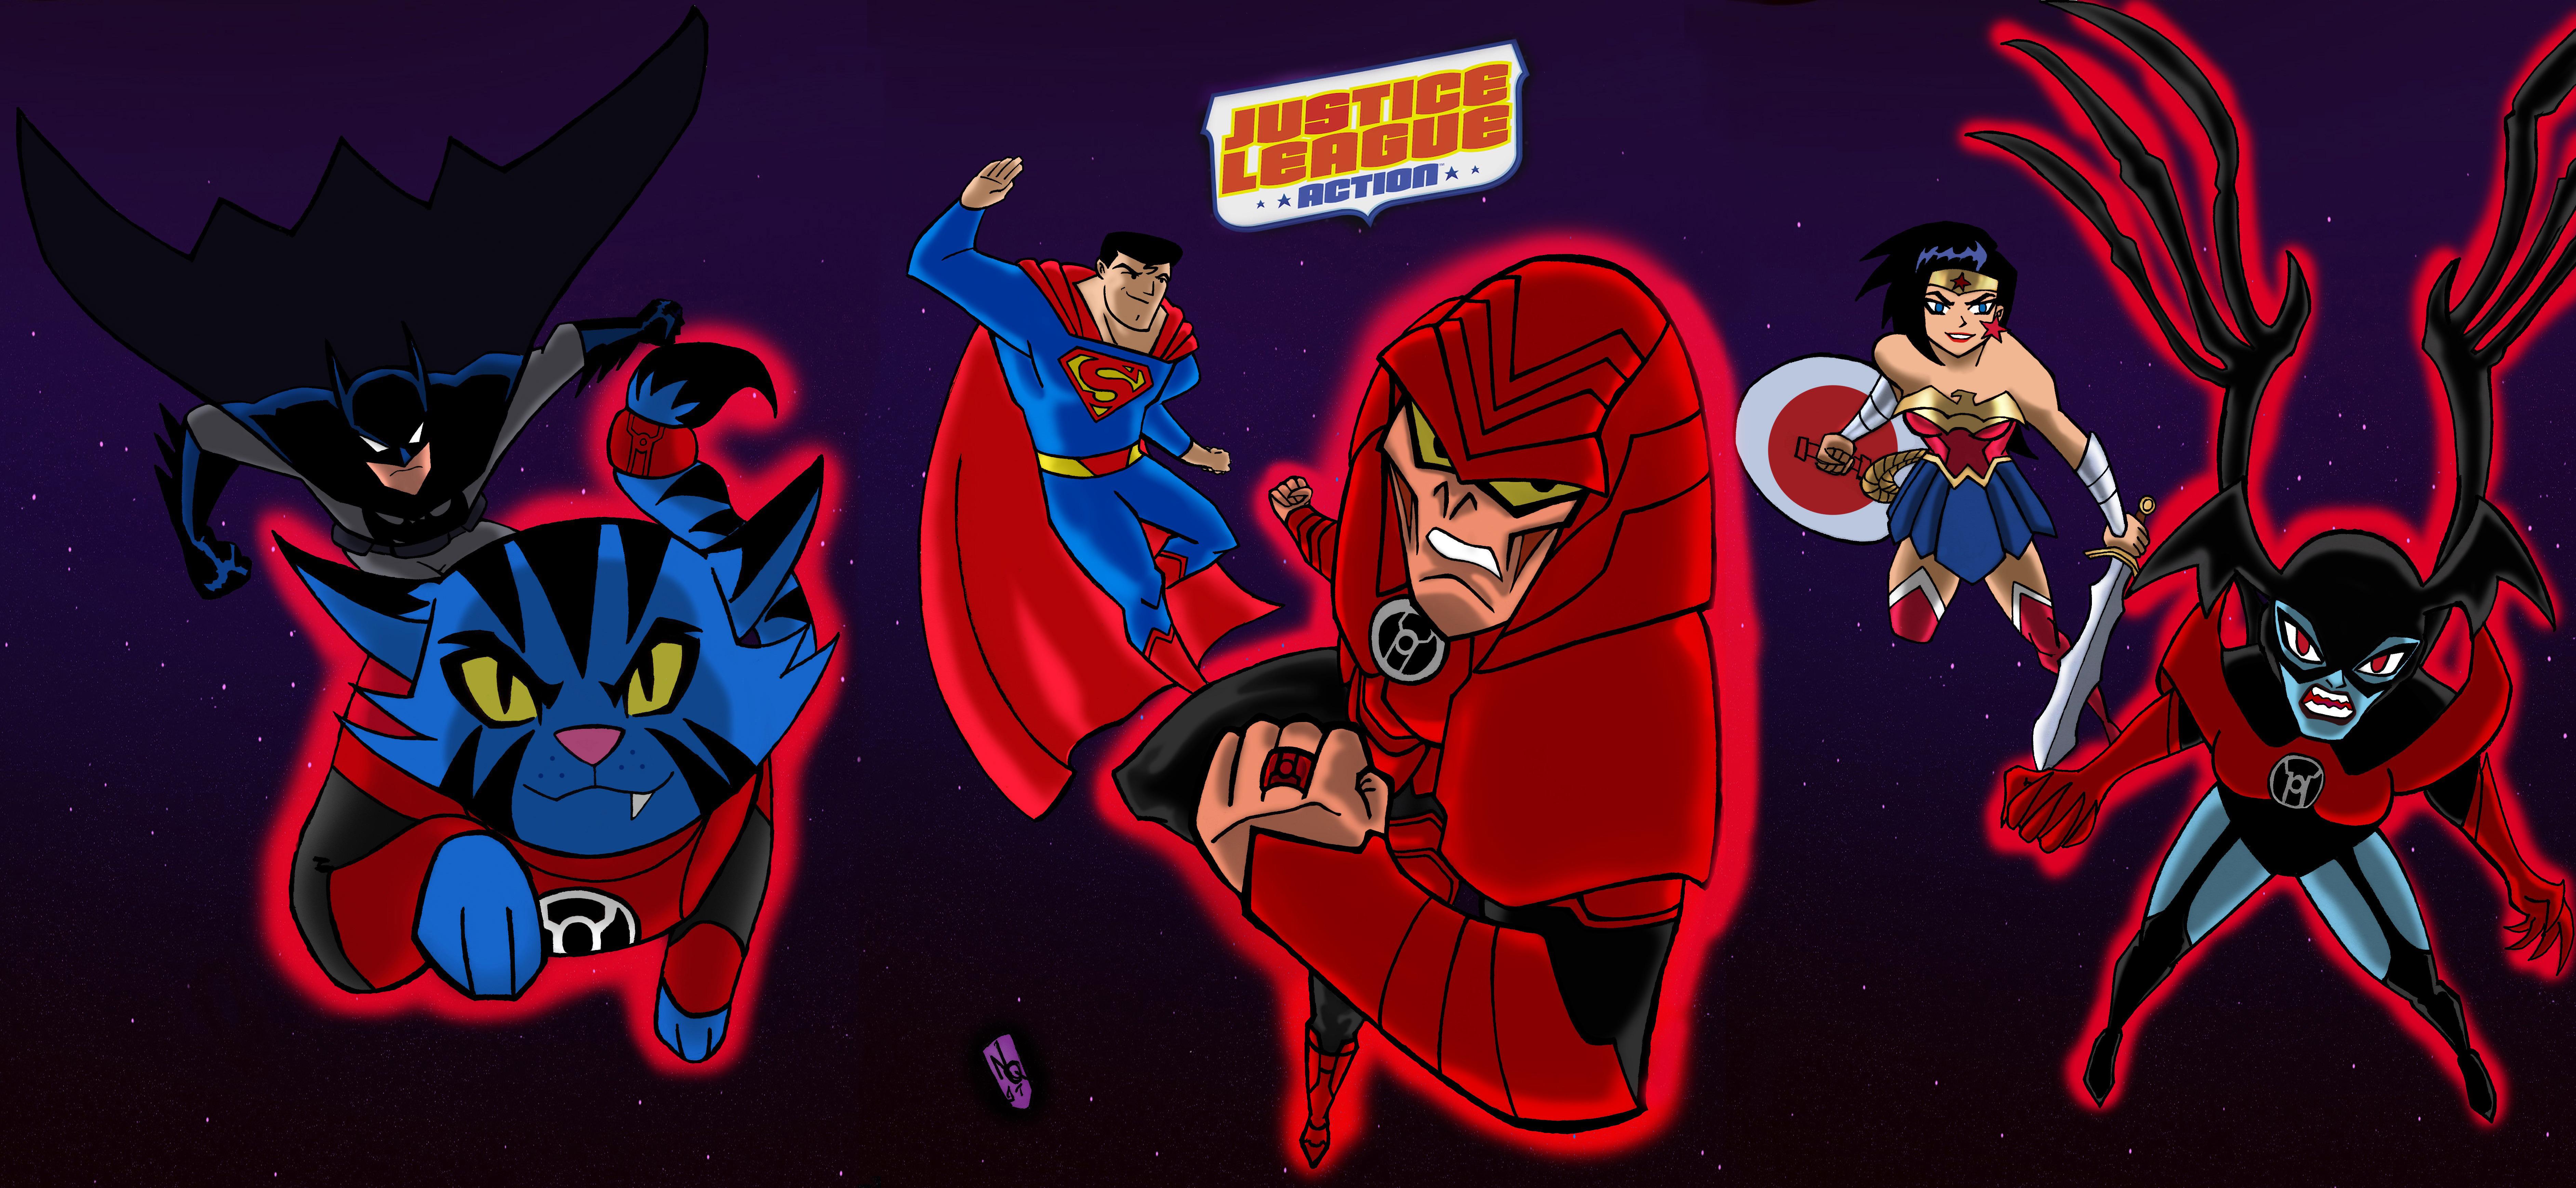 Justice League Action Wallpaper High Quality